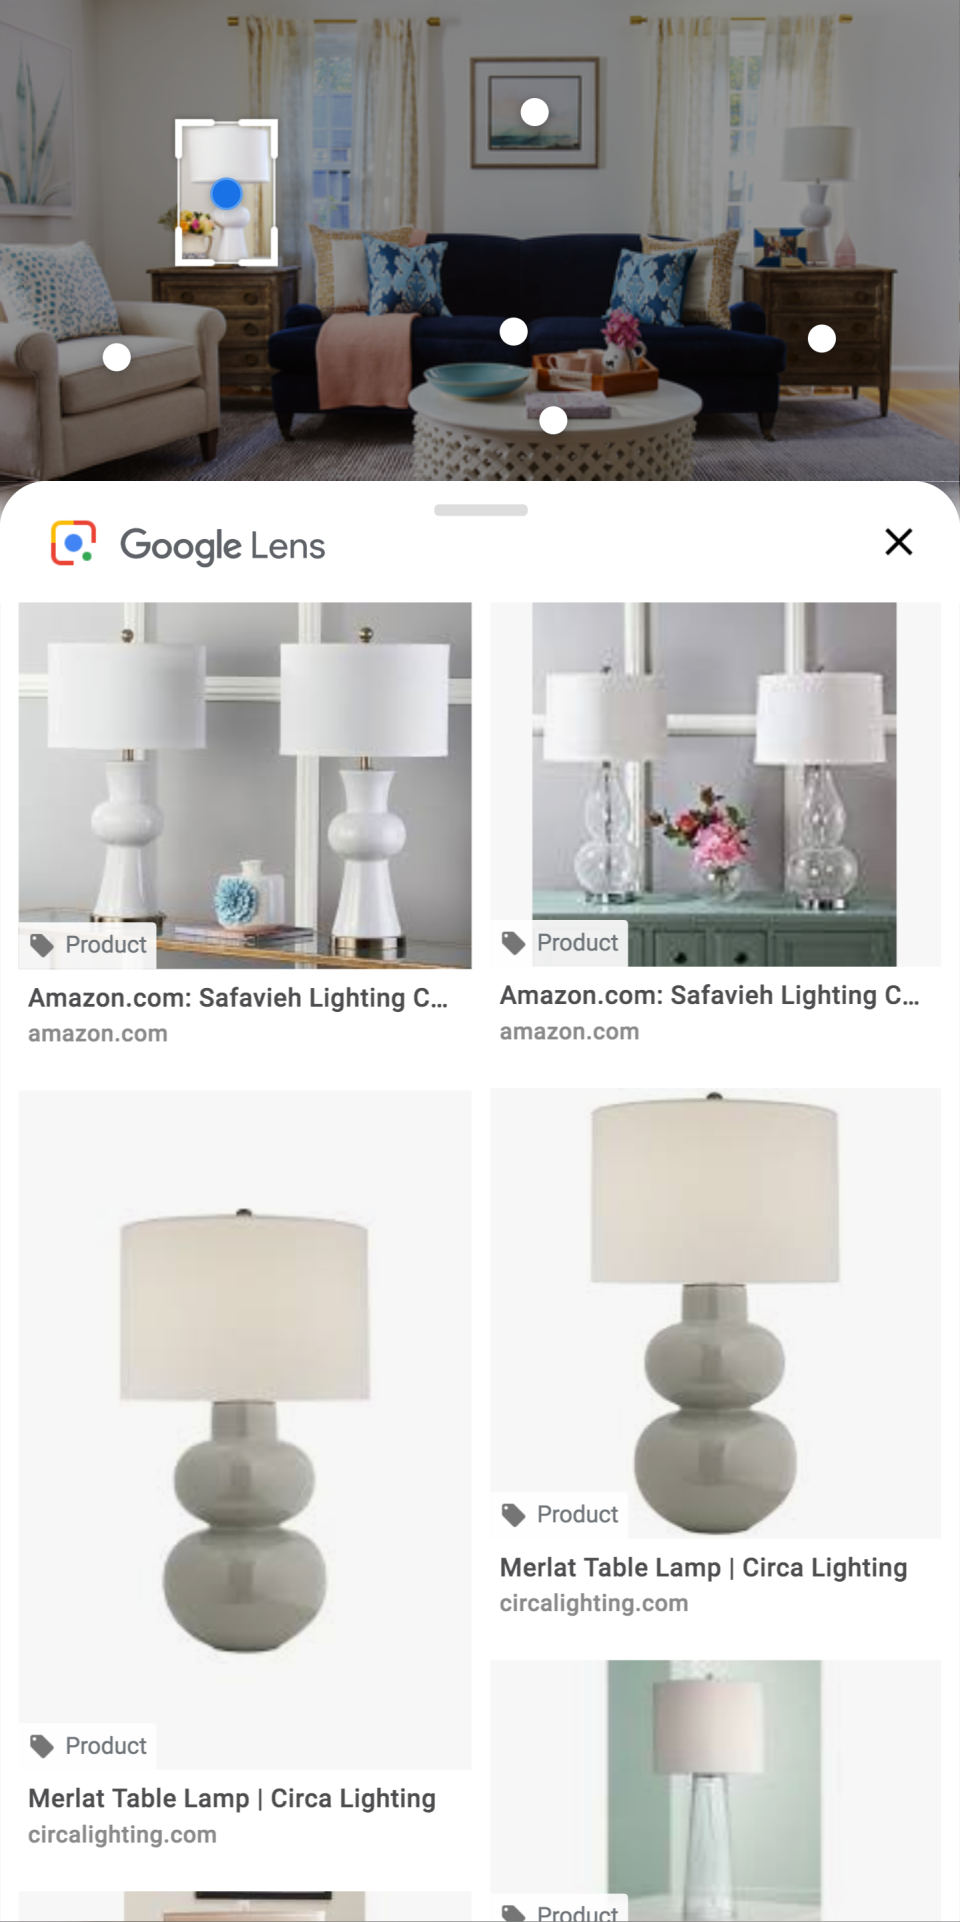 For photos with multiple items Google Lens recognizes, you can click or tap to select the item in the image that interests you most.